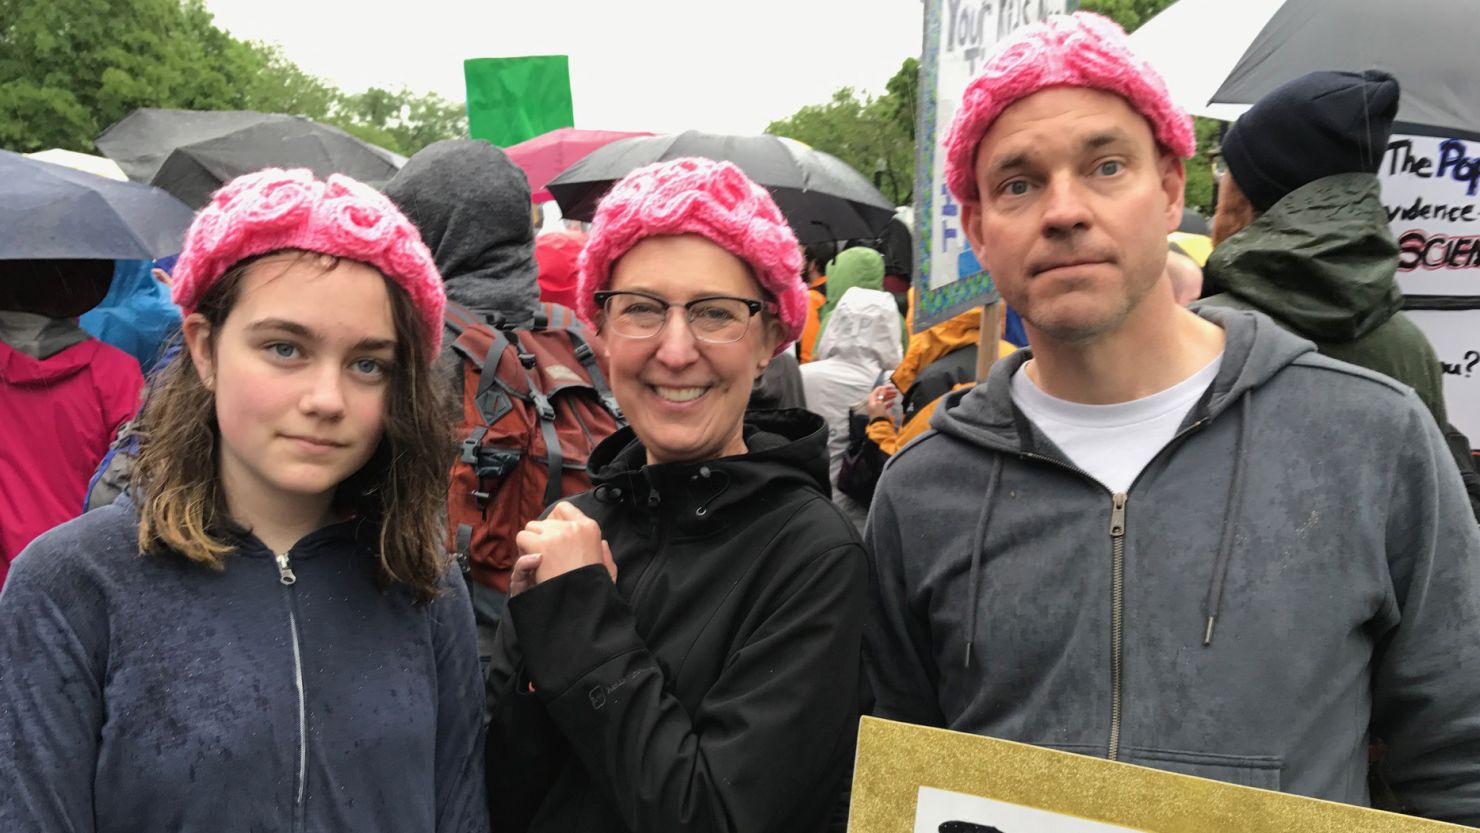 Chaz Mason, right, attended the march with his 12-year-old daughter Fiona, left, who wants to be a neurosurgeon. 